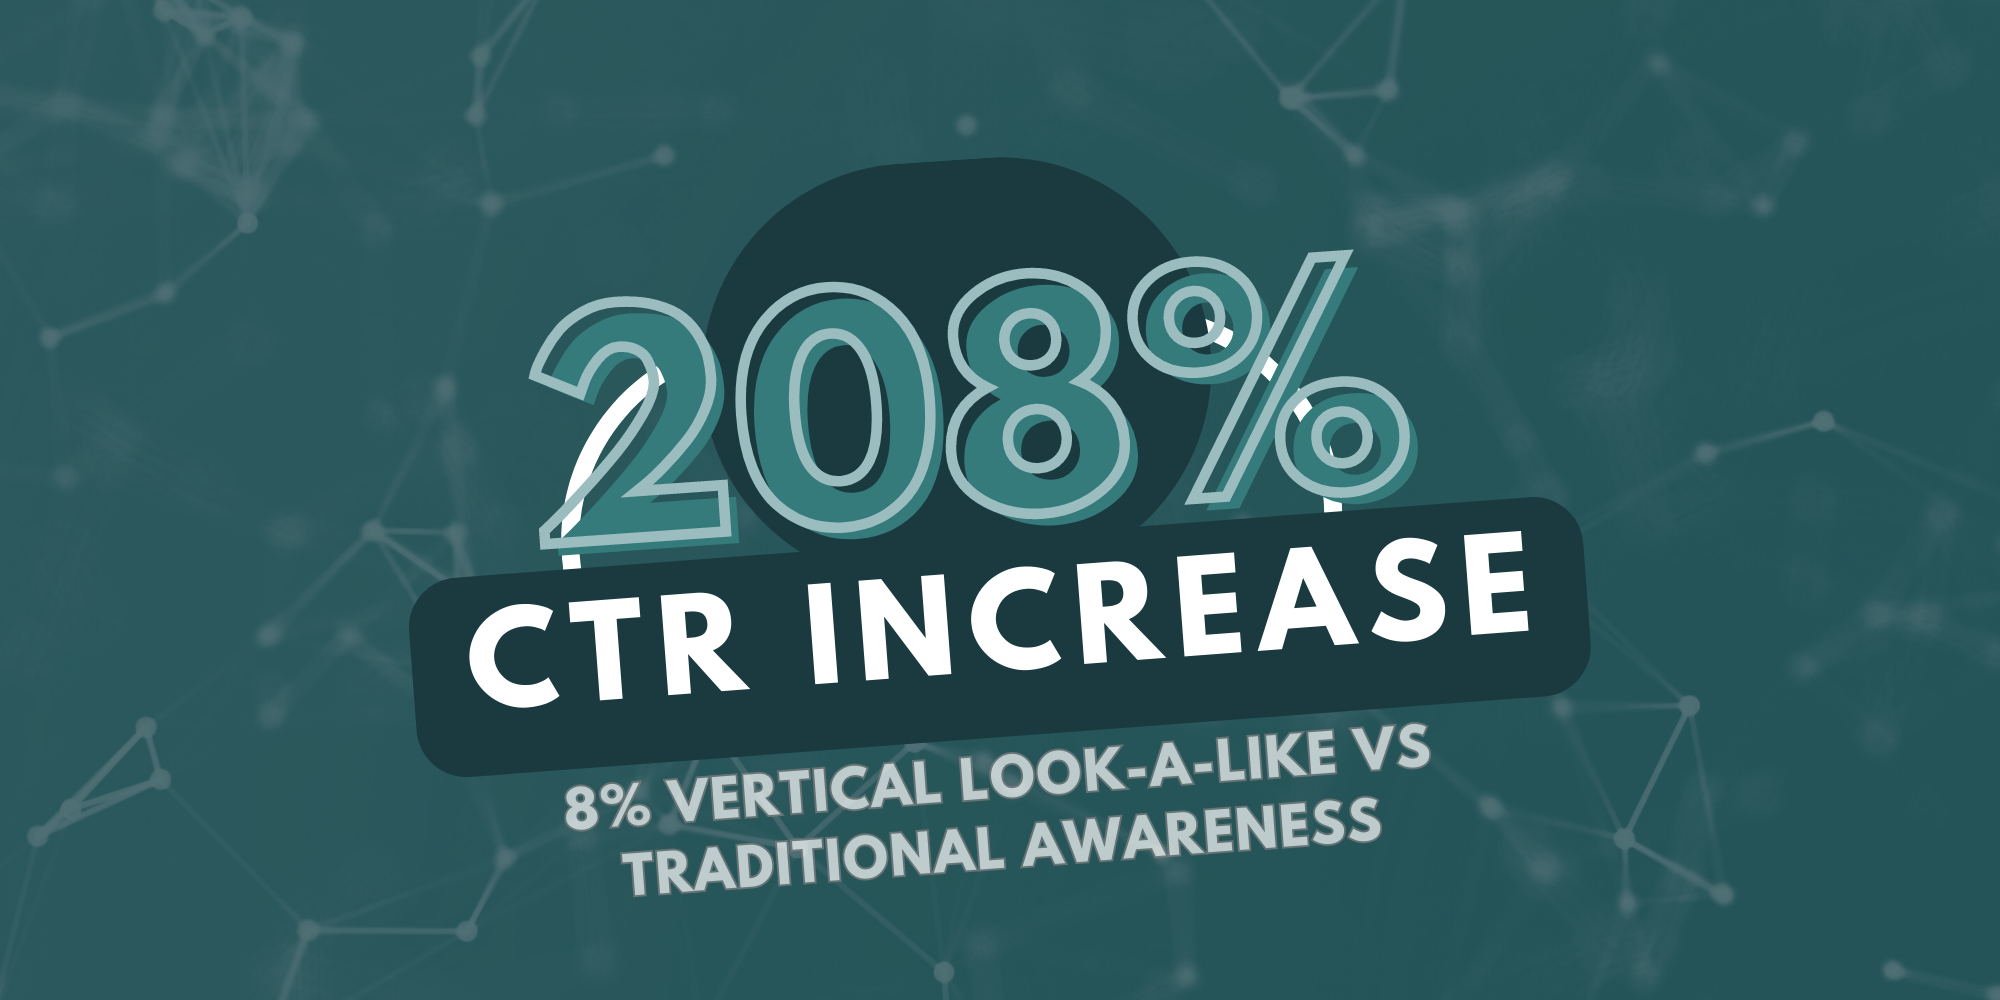 208% increase in click-through rate between traditional targeting campaigns and propensity list campaigns